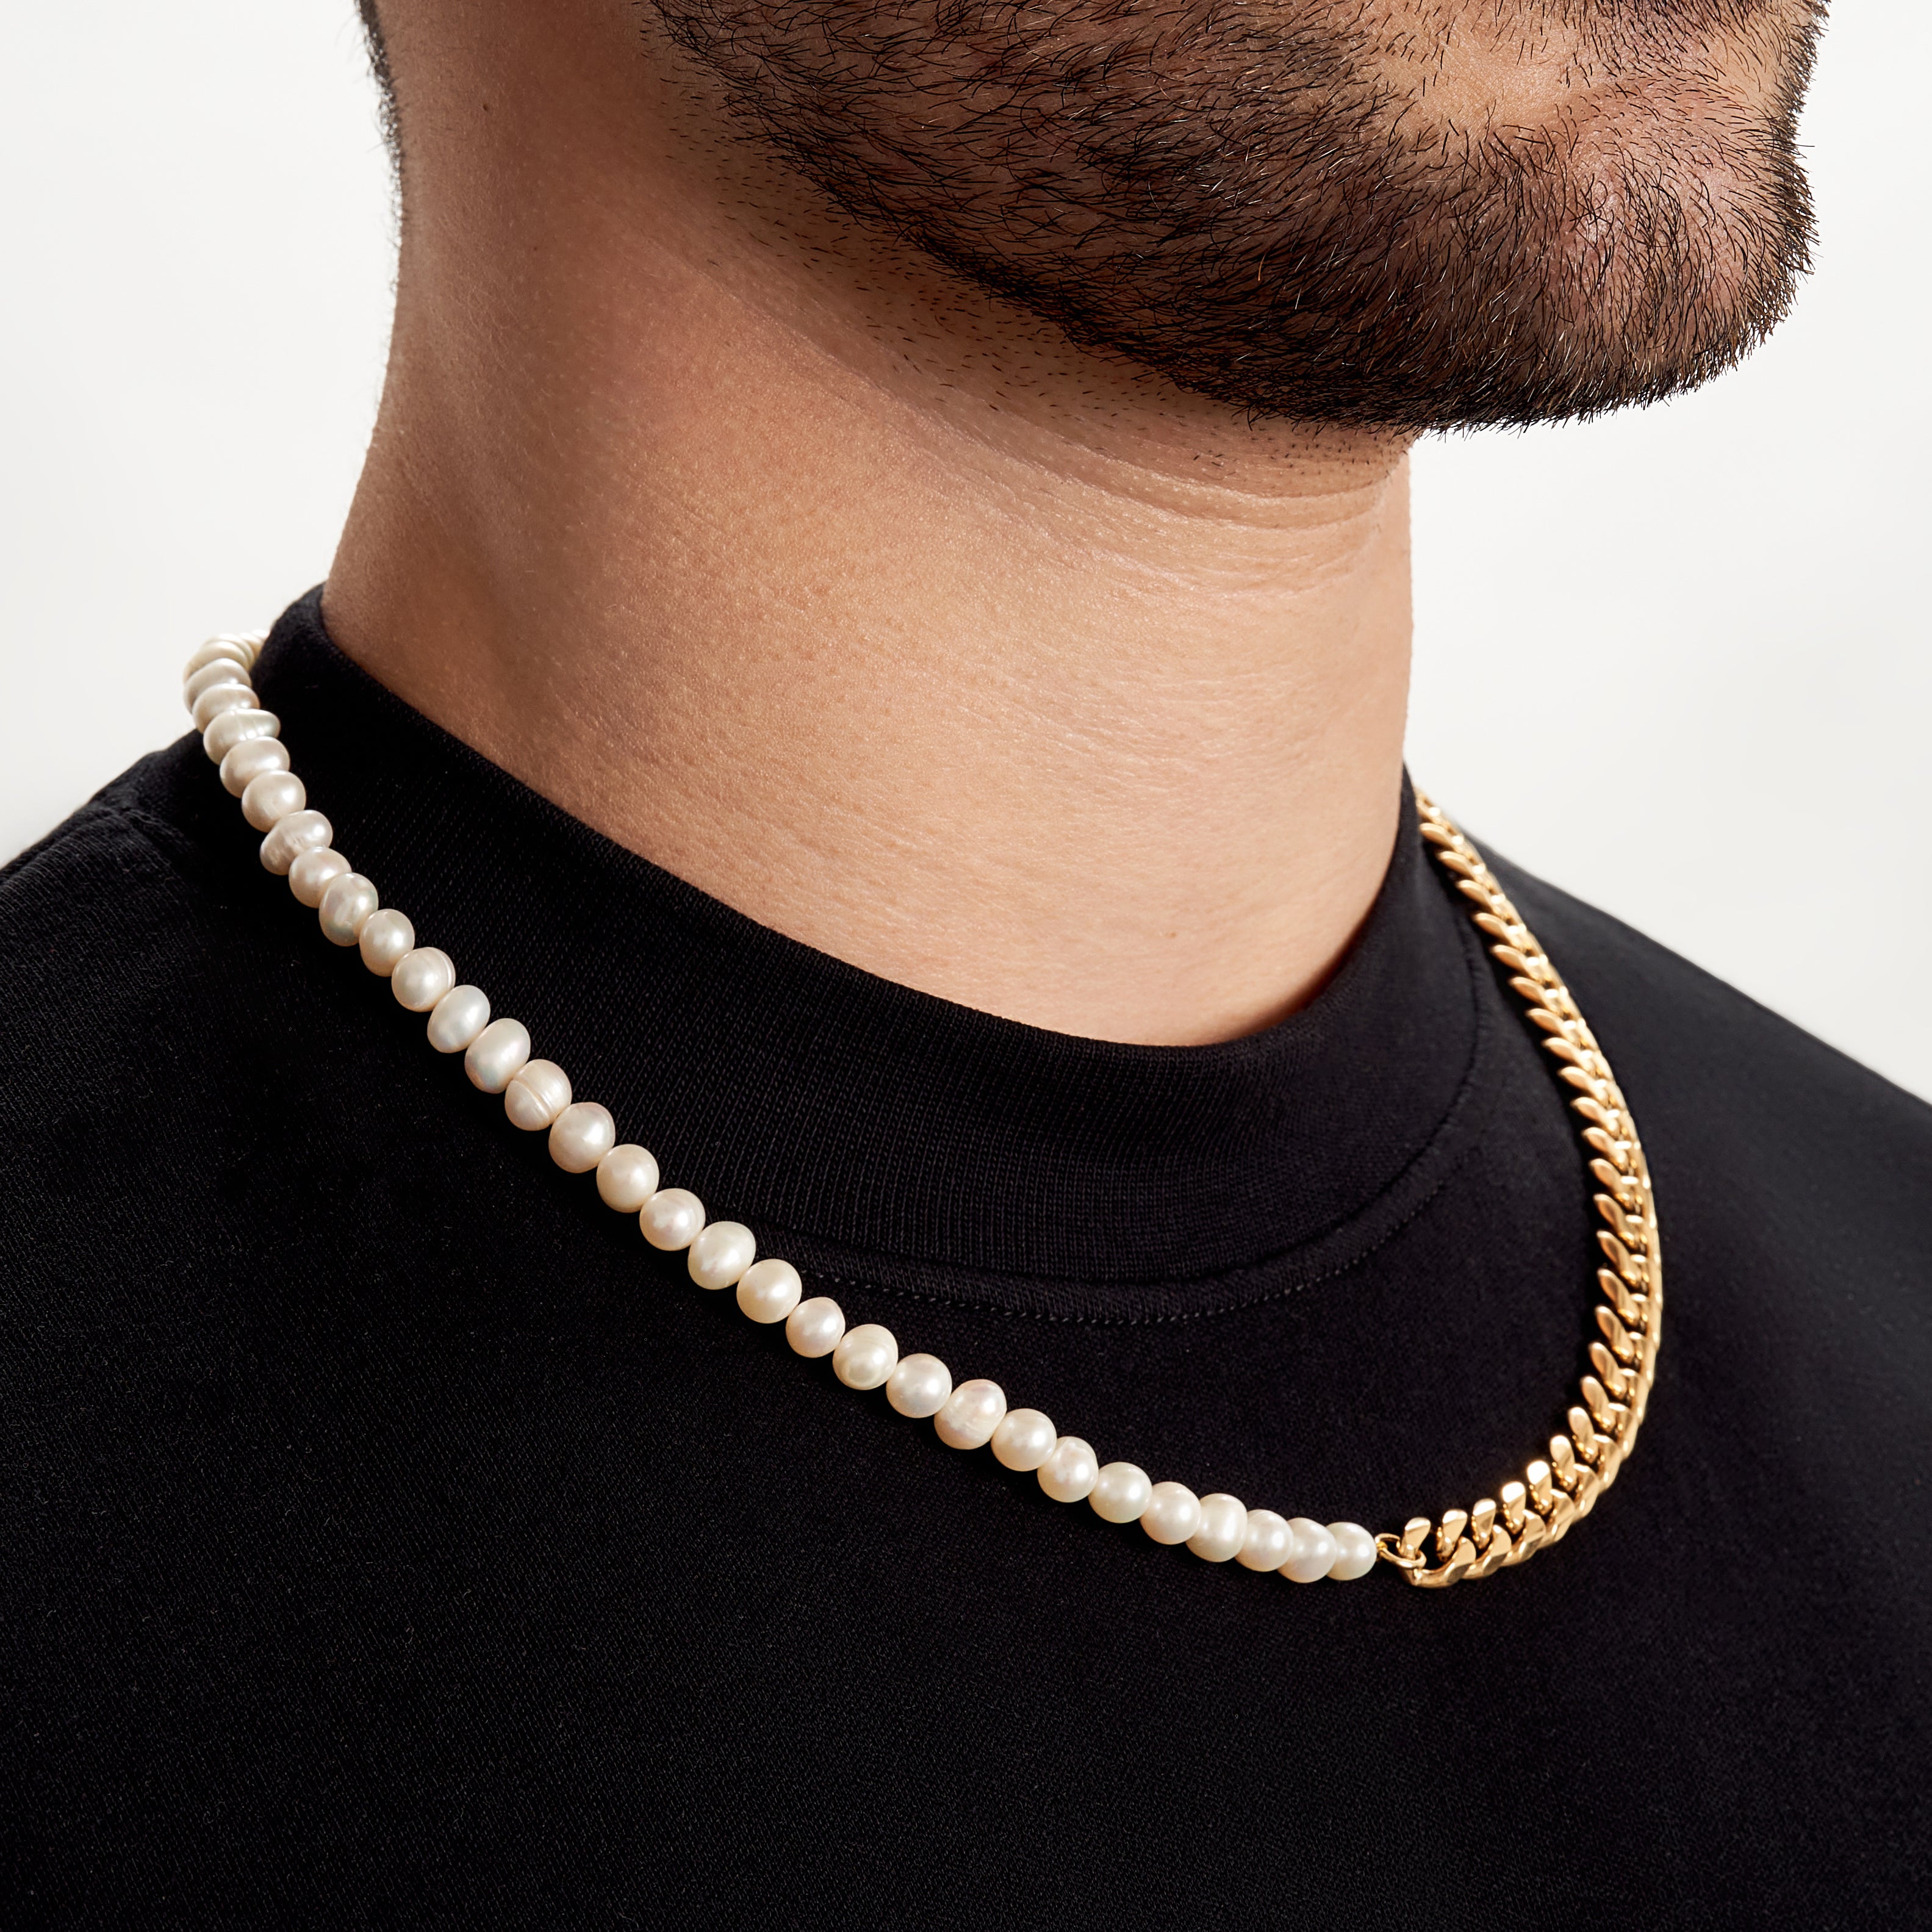 2020 is the year of men and pearl necklaces! - Times of India